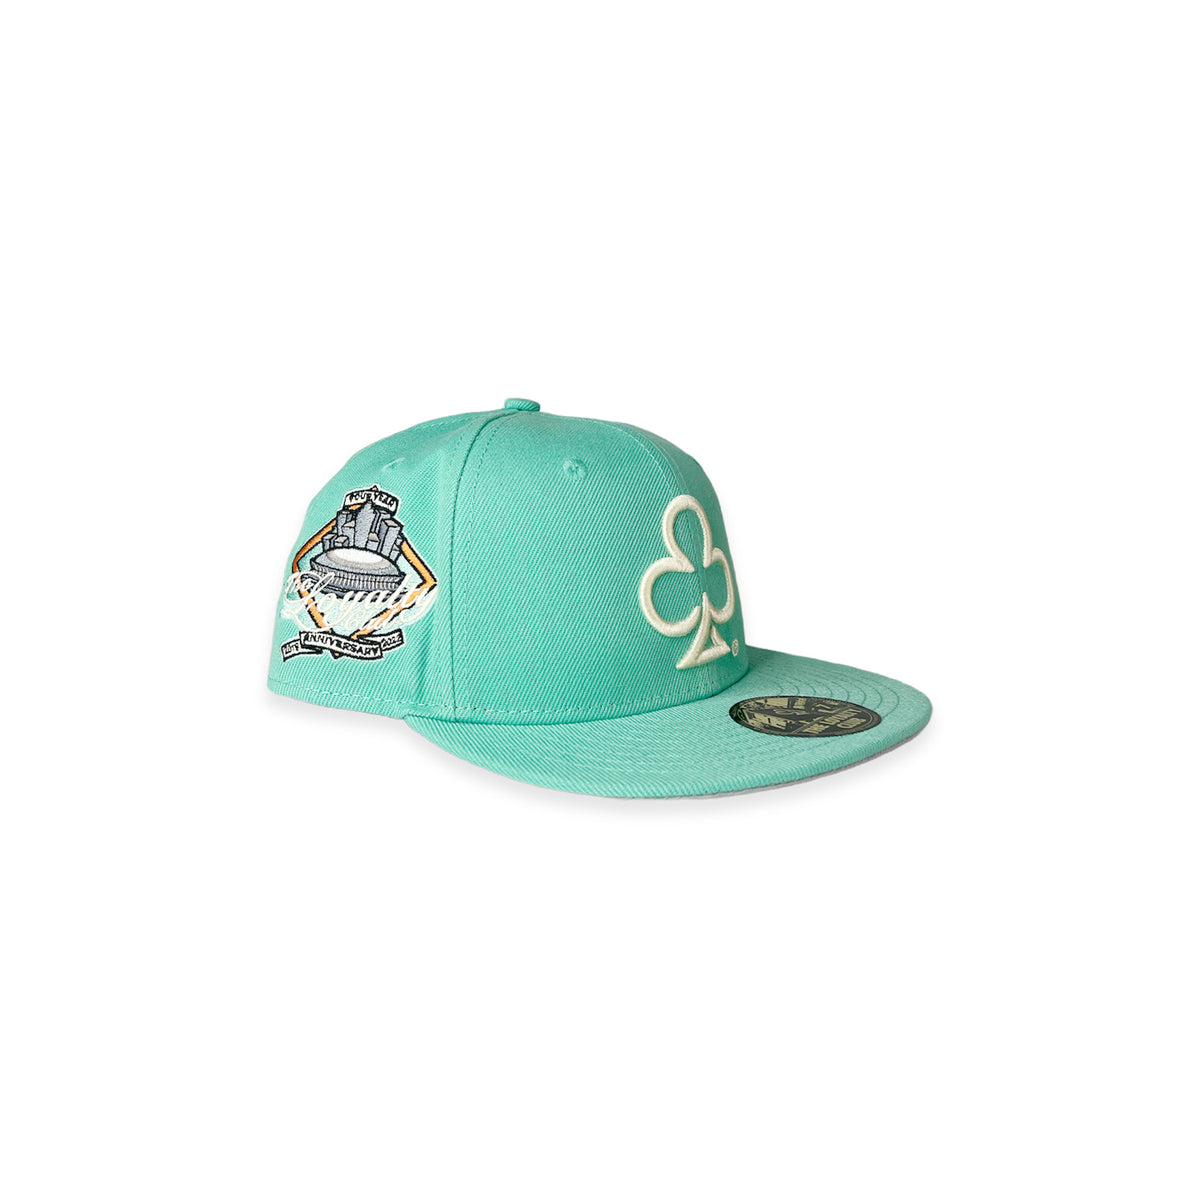 THE LOYALTY CLUB 4 YEAR ANNIVERSARY FITTED CAP (MINT) – The 